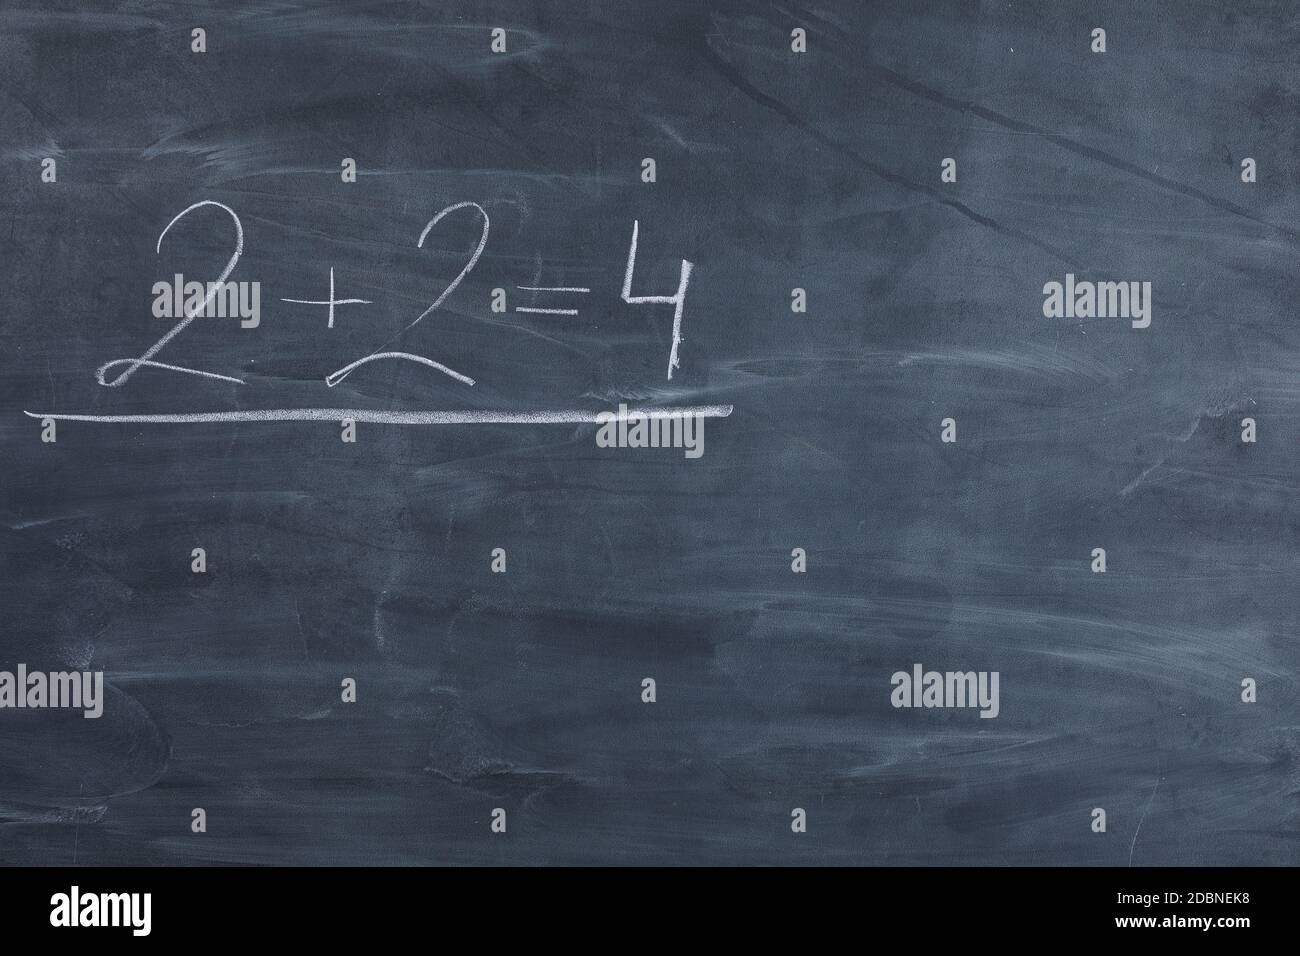 It's written in white chalk on a blackboard - two plus two equals four. The basics of arithmetic start with the youngest grades in every school in the world. Stock Photo